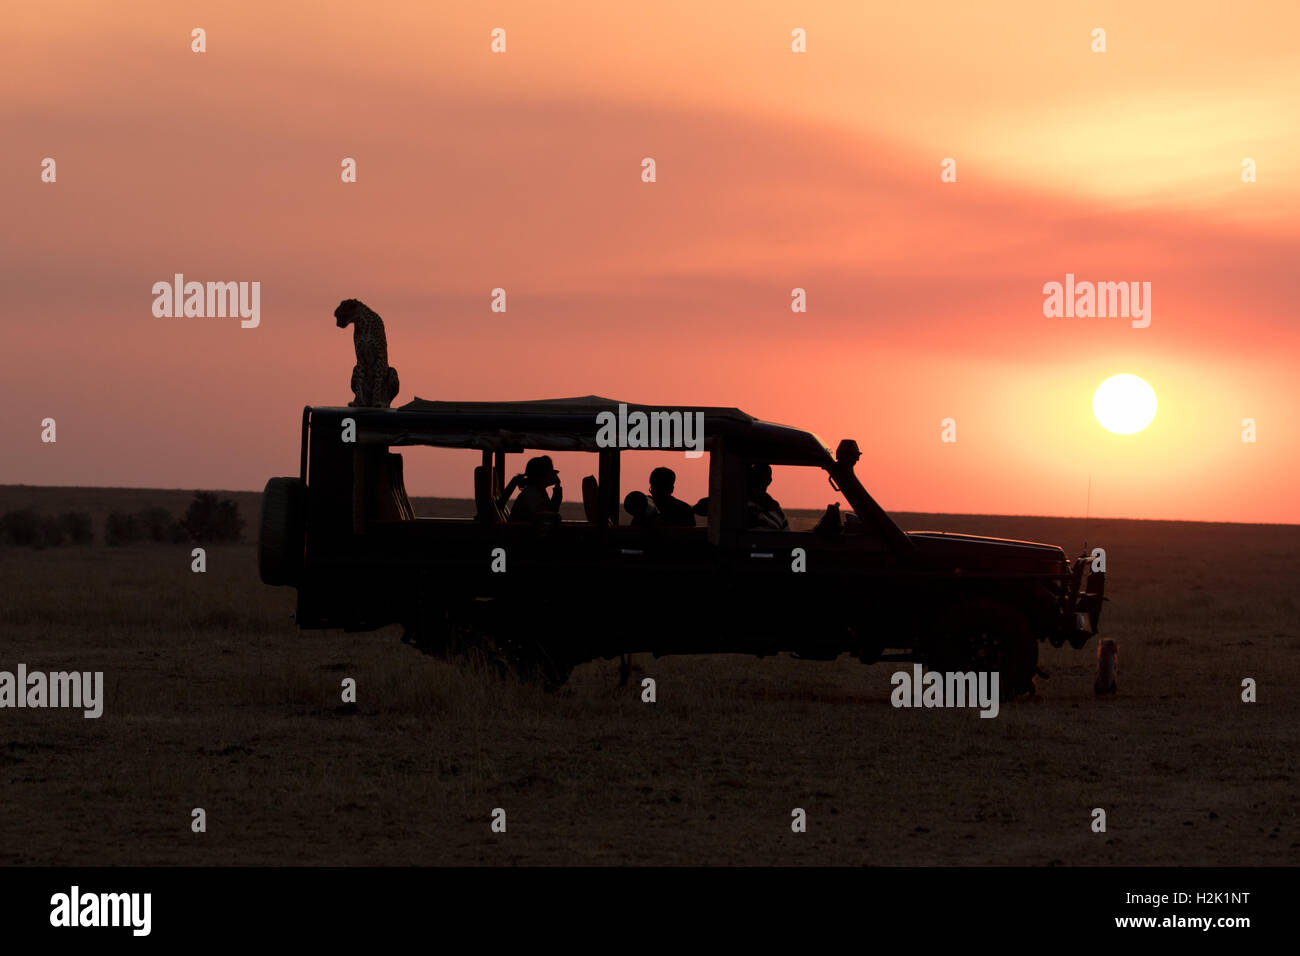 A silhouette of a cheetah sitting atop a safari vehicle as the sun sets in the background Stock Photo